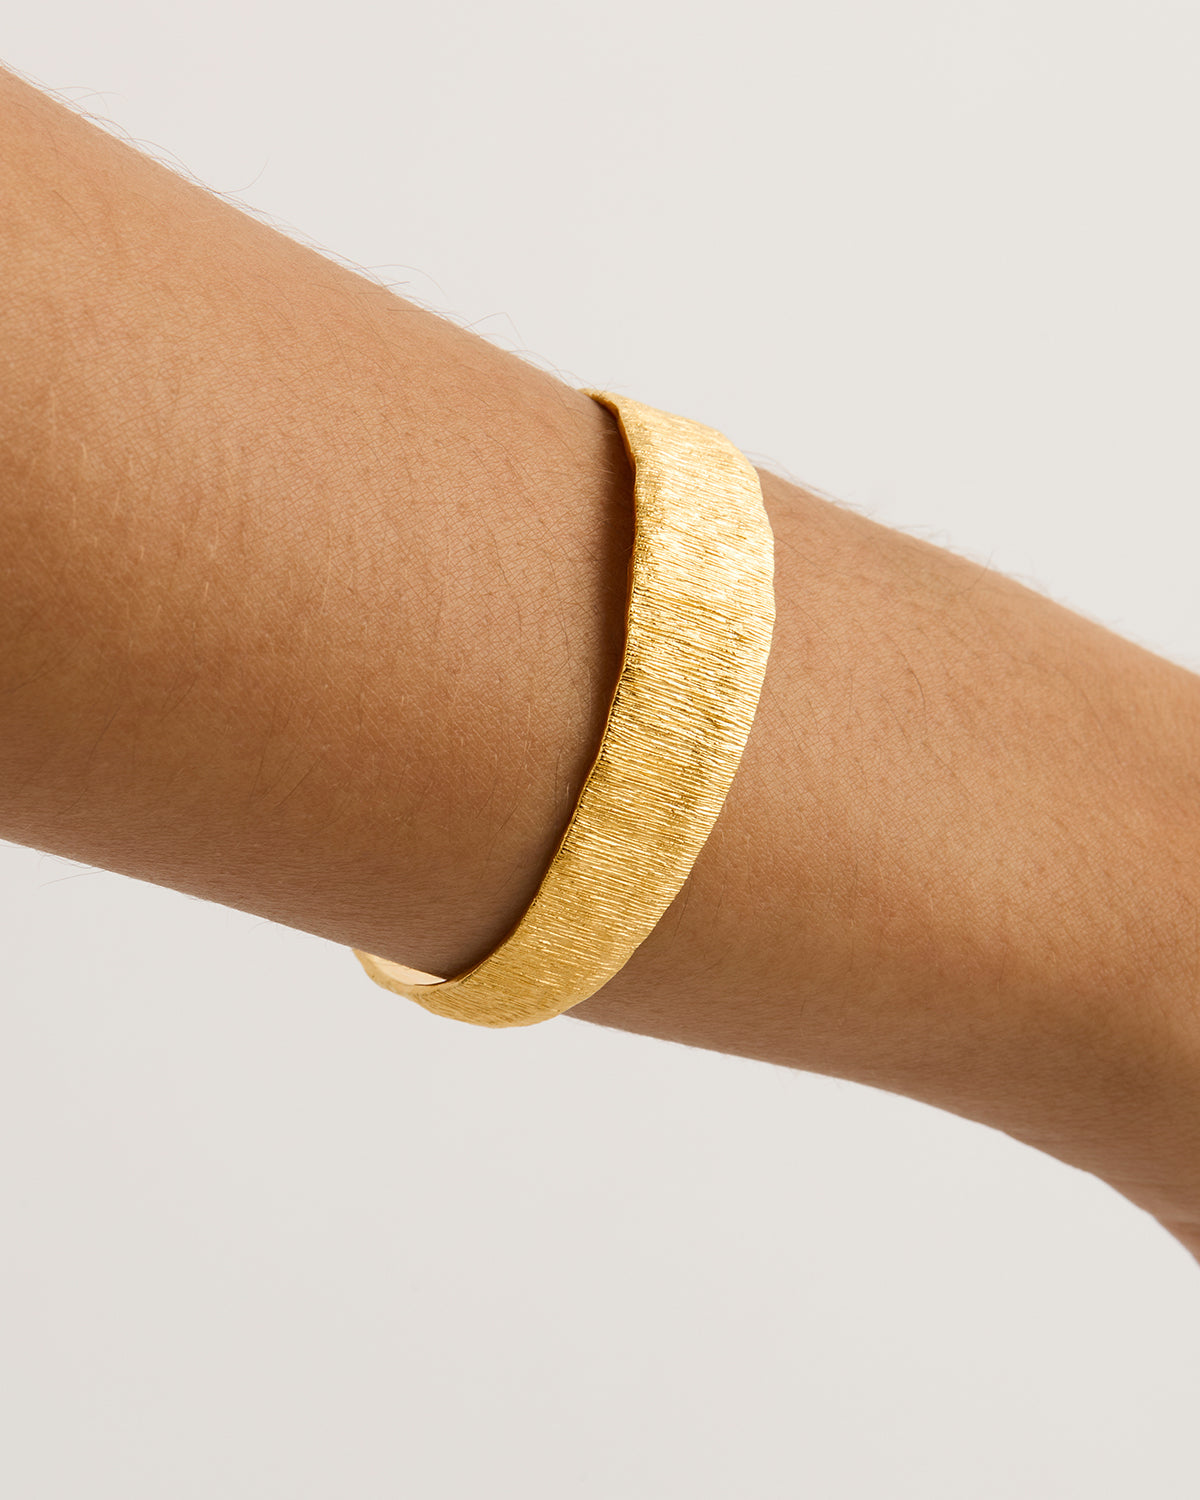 By Charlotte Woven Light Cuff, Gold